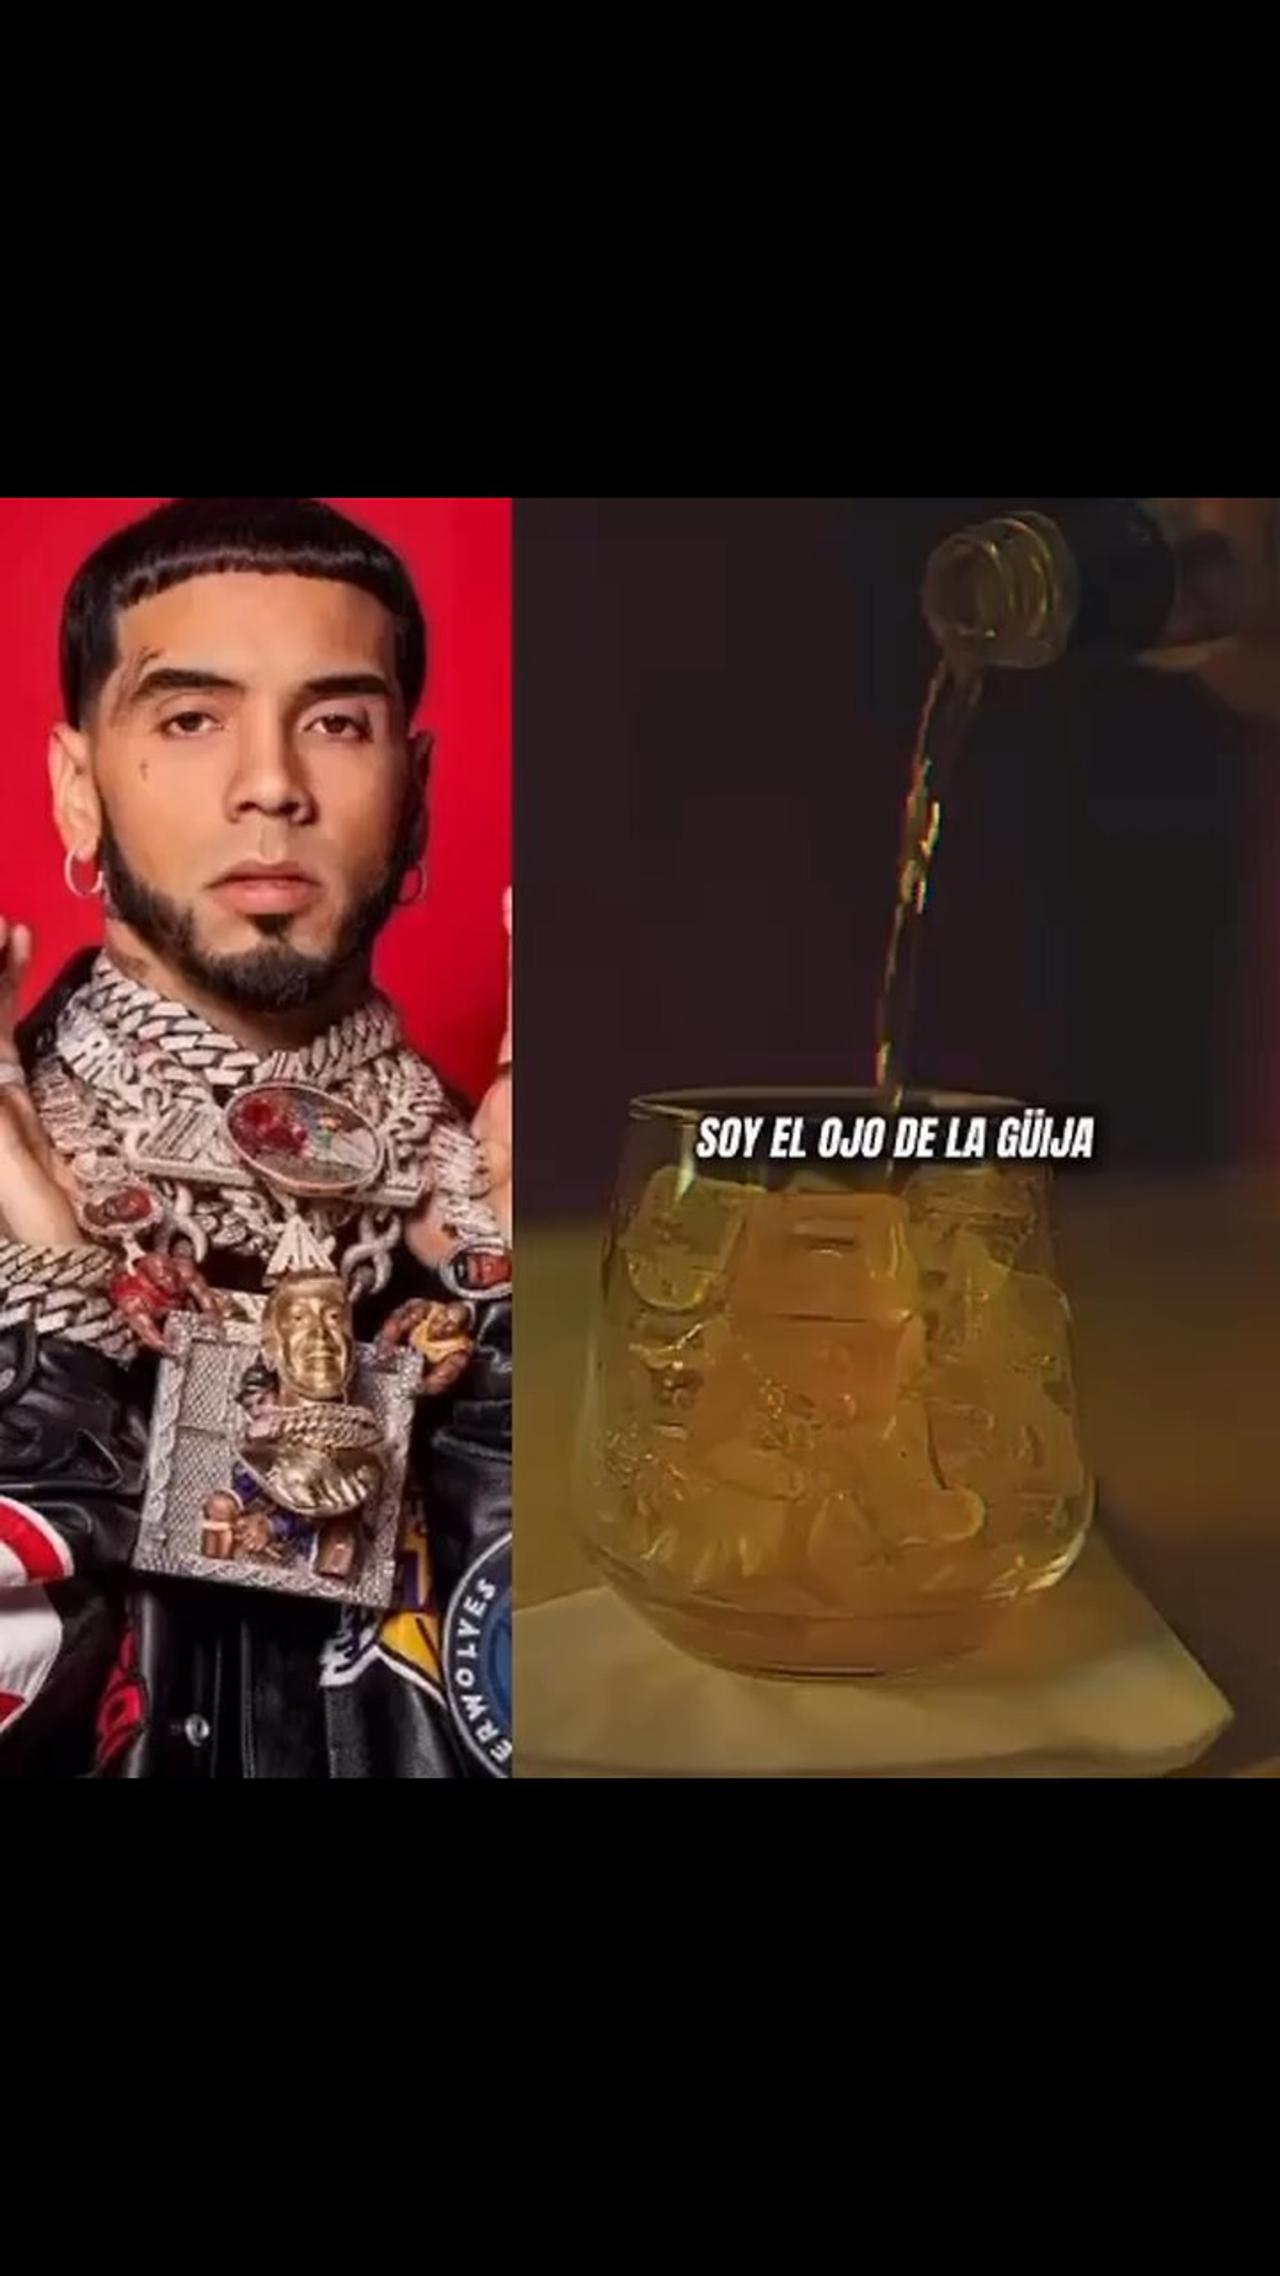 Latin Artist Arcangel disses Anuel AA for having 6ix9ine raise his daughter and call him Dad